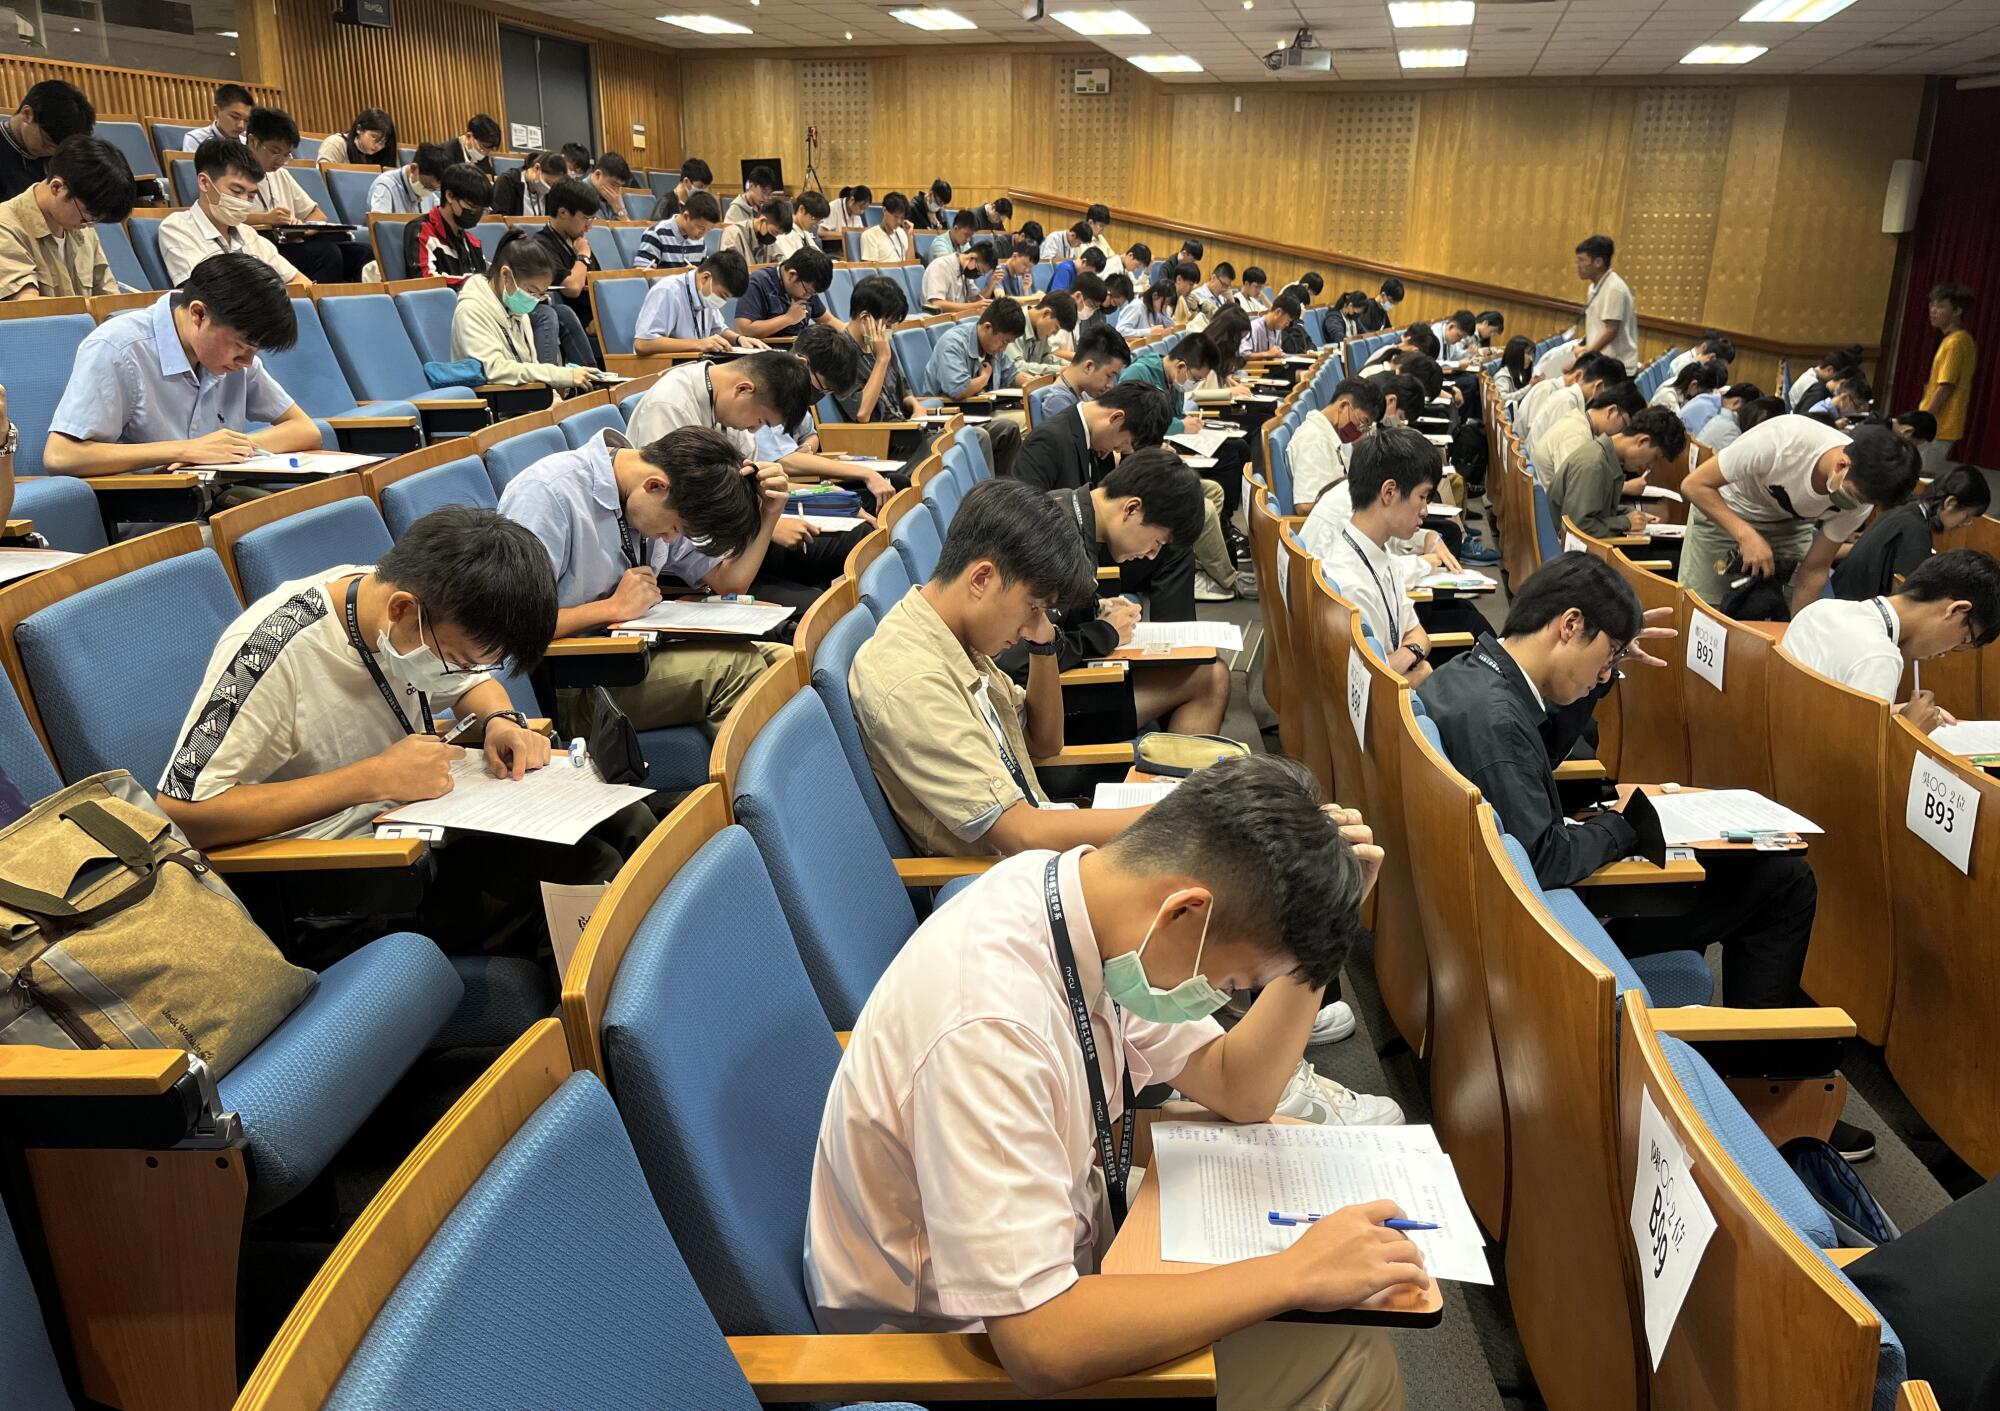 Rows of test takers seated in an auditorium-style room